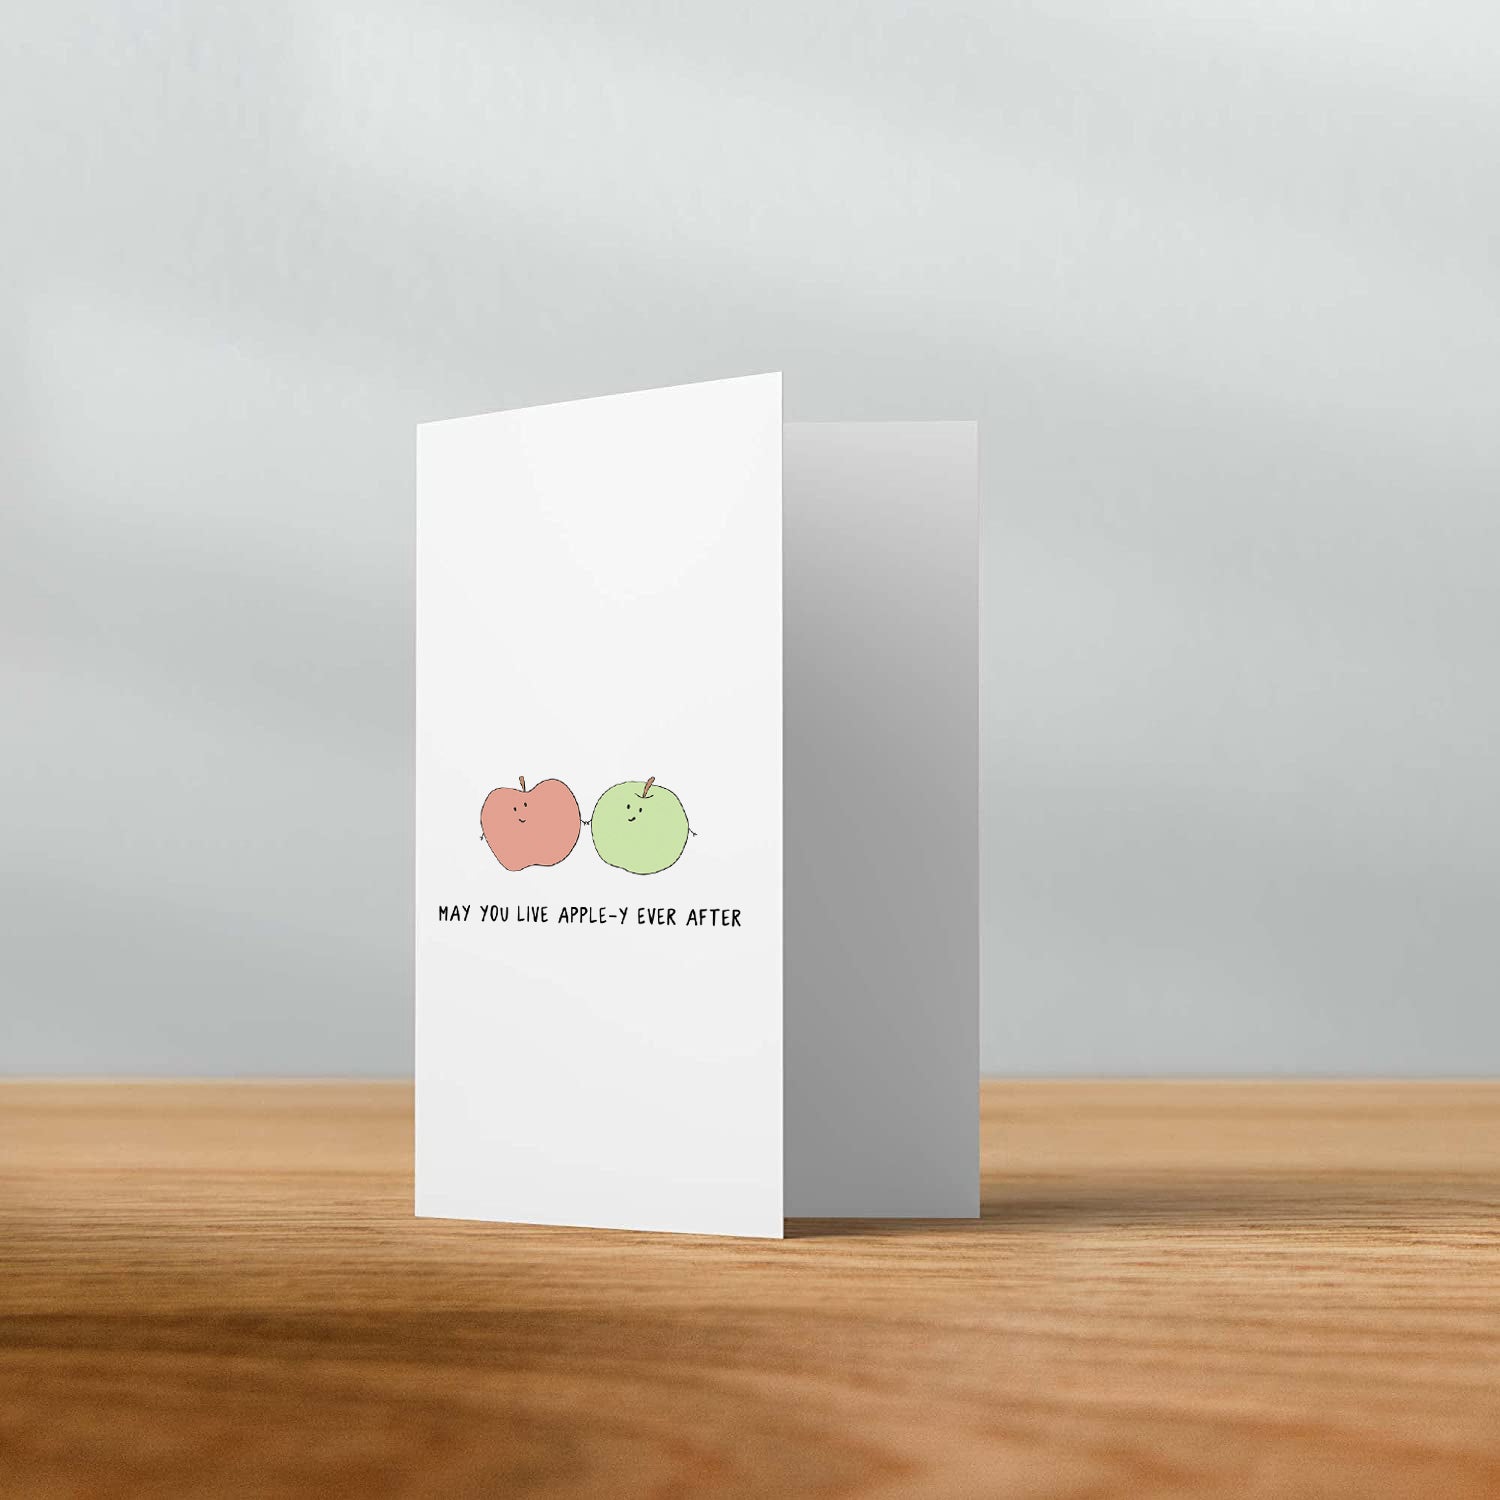 A greeting card featuring two Apple-y Ever After Cards by rockdoodles, enclosed in a natural envelope.